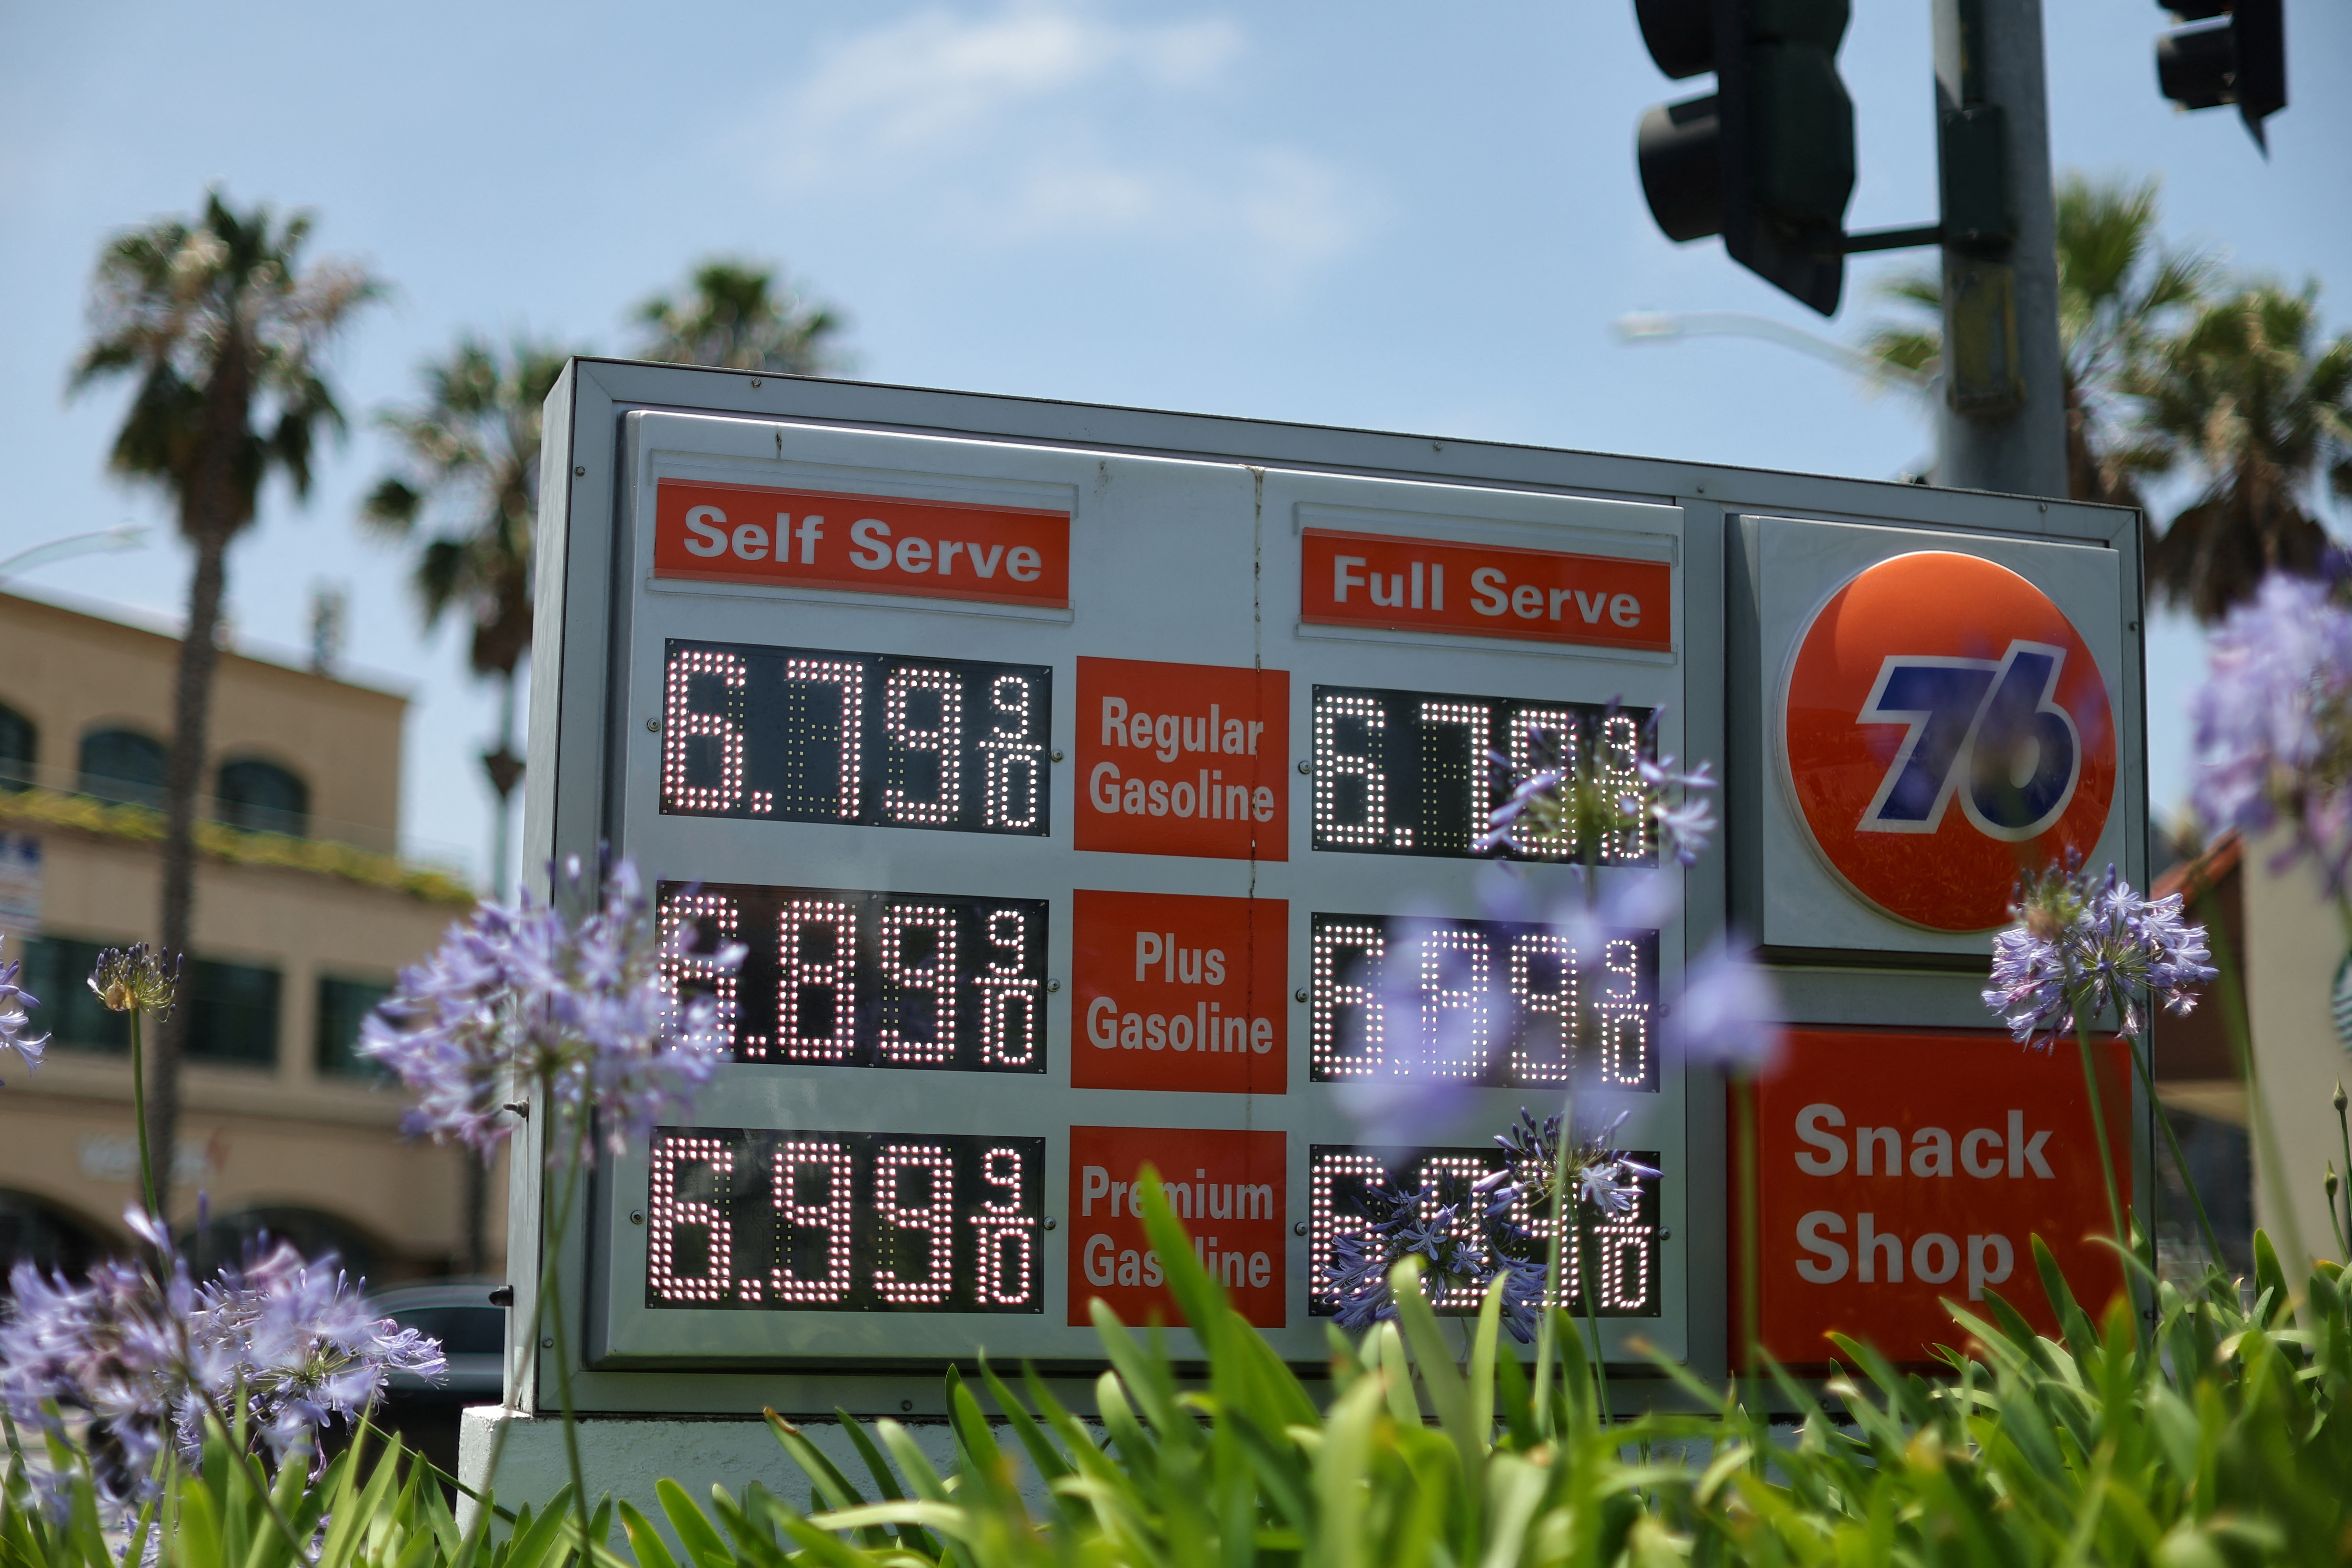 Gas prices over the $6.00 mark are advertised at a 76 Station in Santa Monica, California